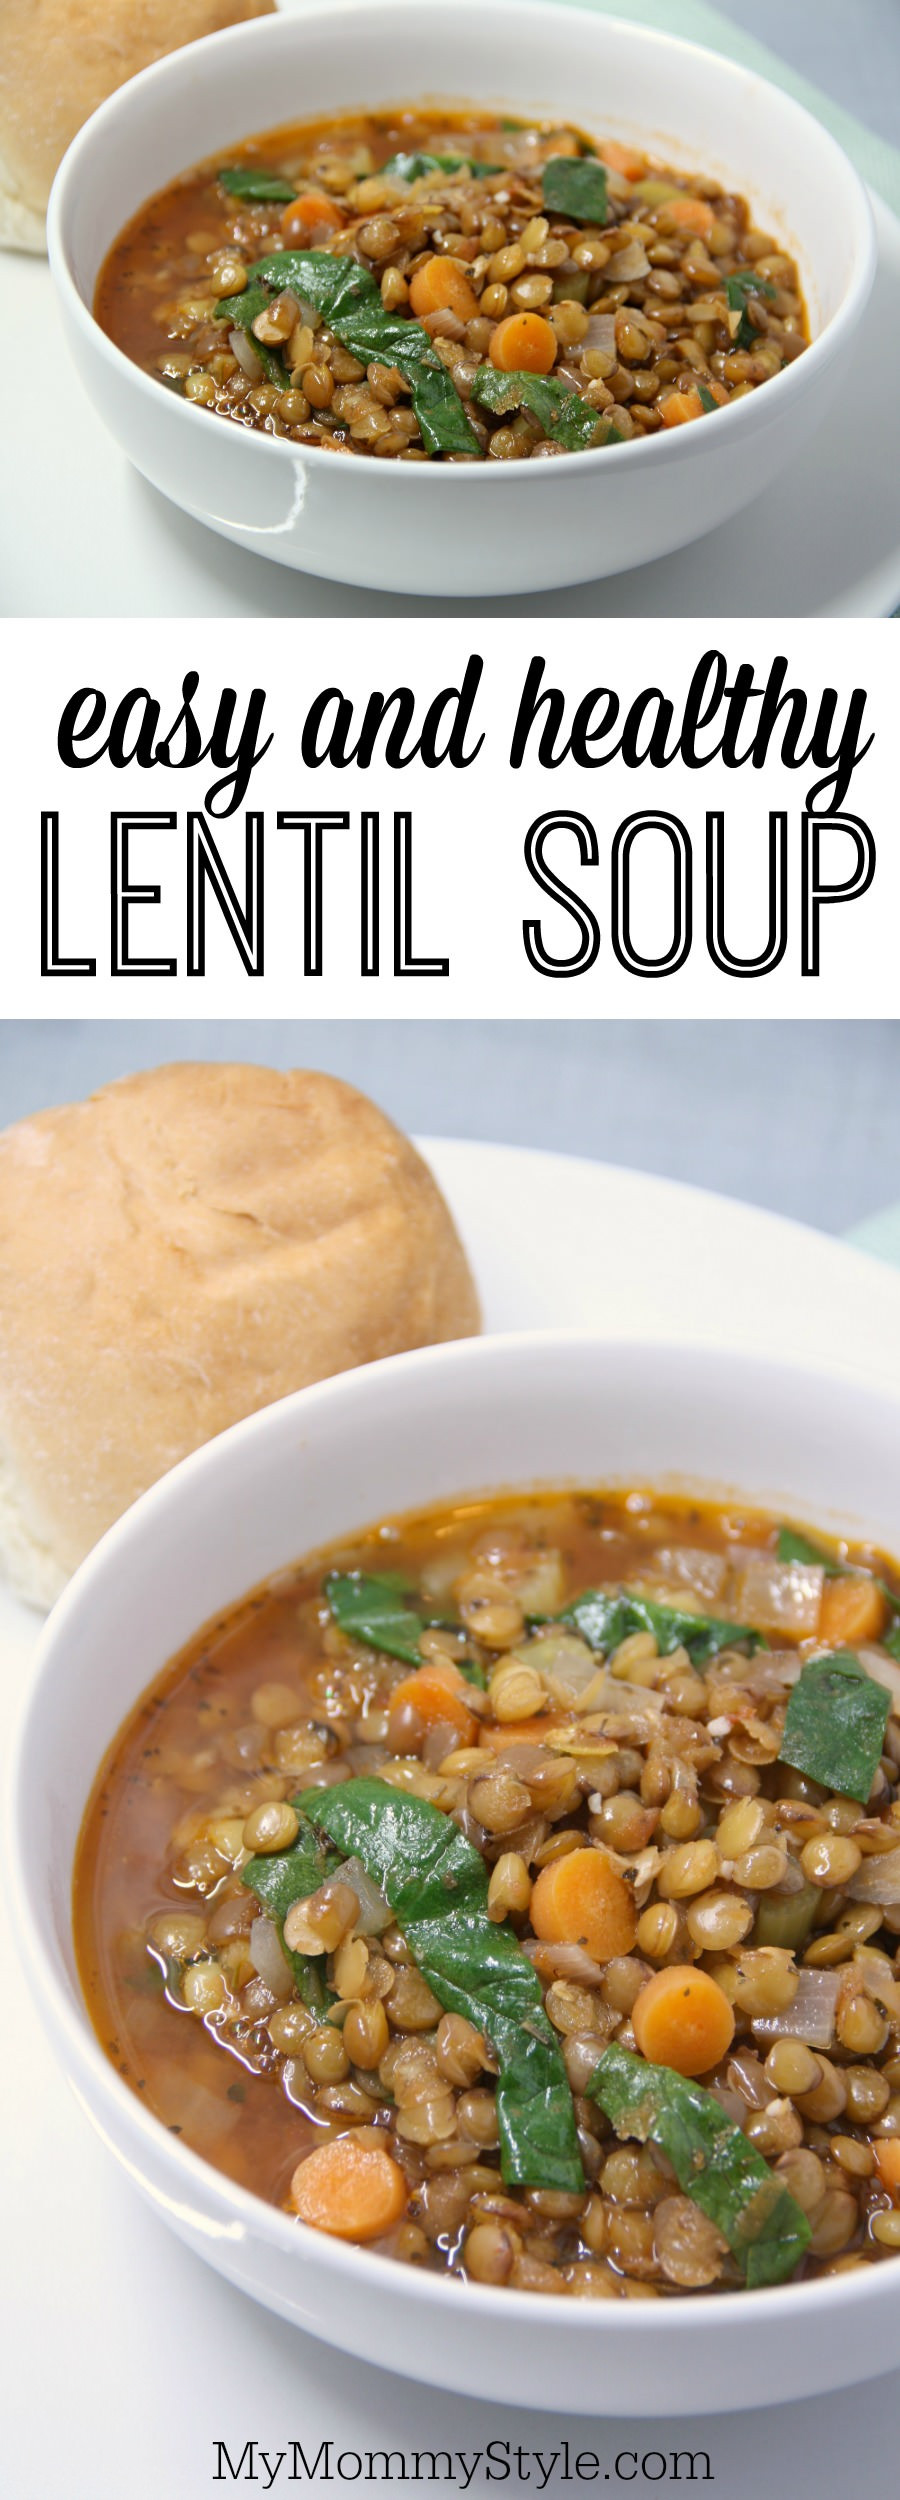 Easy Healthy Soups
 Easy and Healthy Lentil Soup My Mommy Style